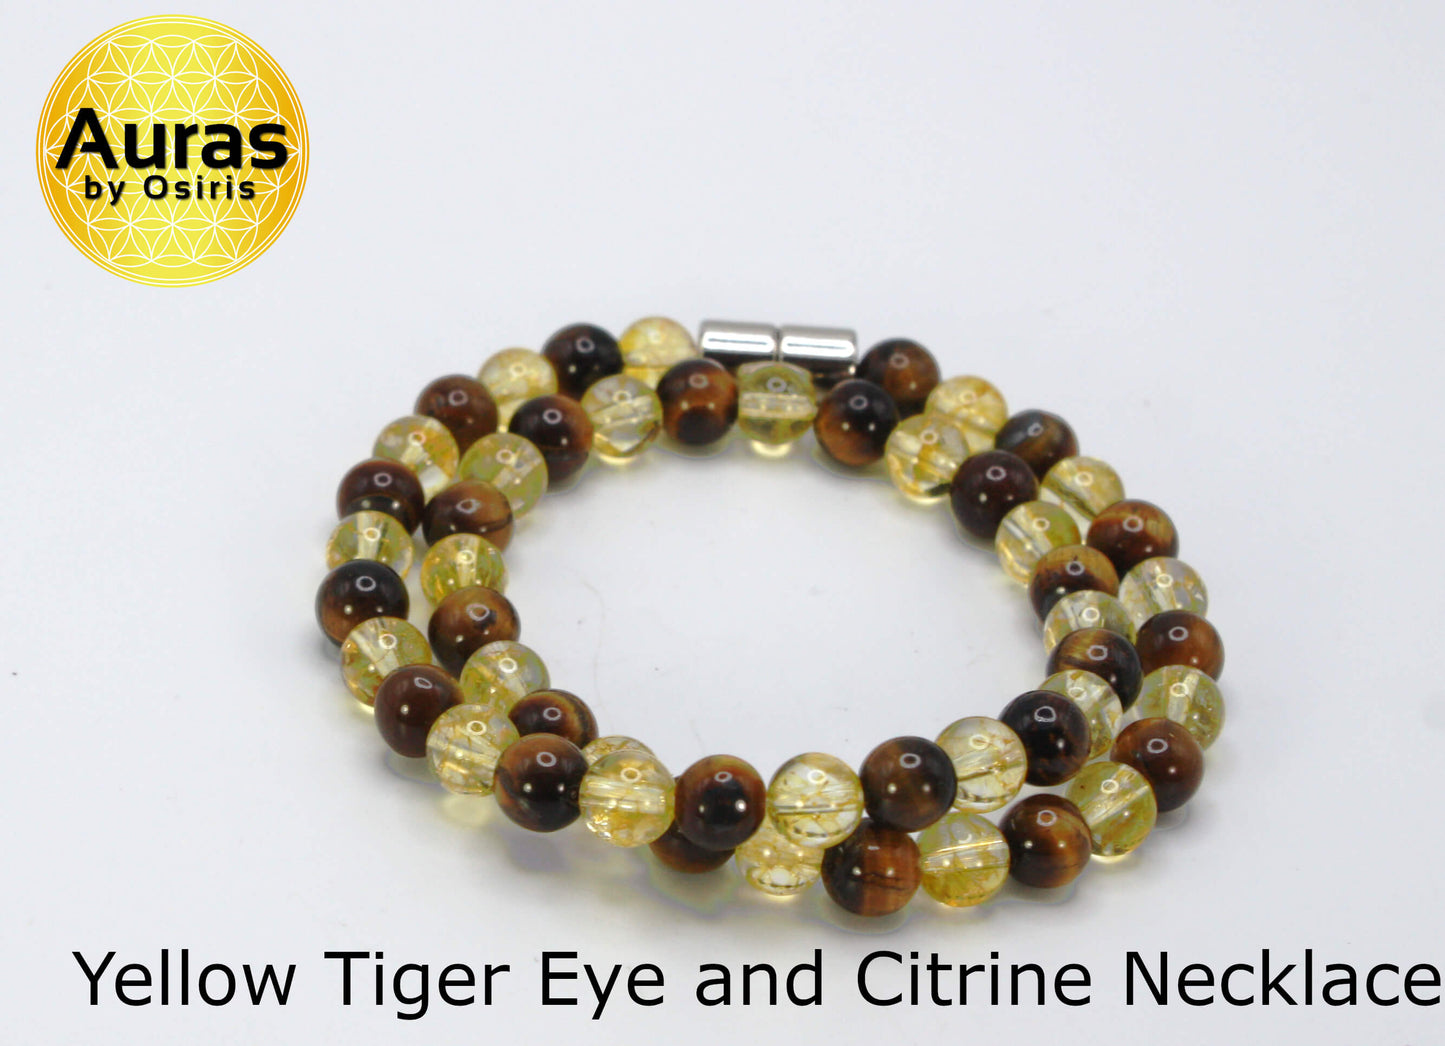 Genuine Yellow Tiger Eye and Citrine Necklace - Gifts for Man/Woman - 6mm Bead Diameter Necklace